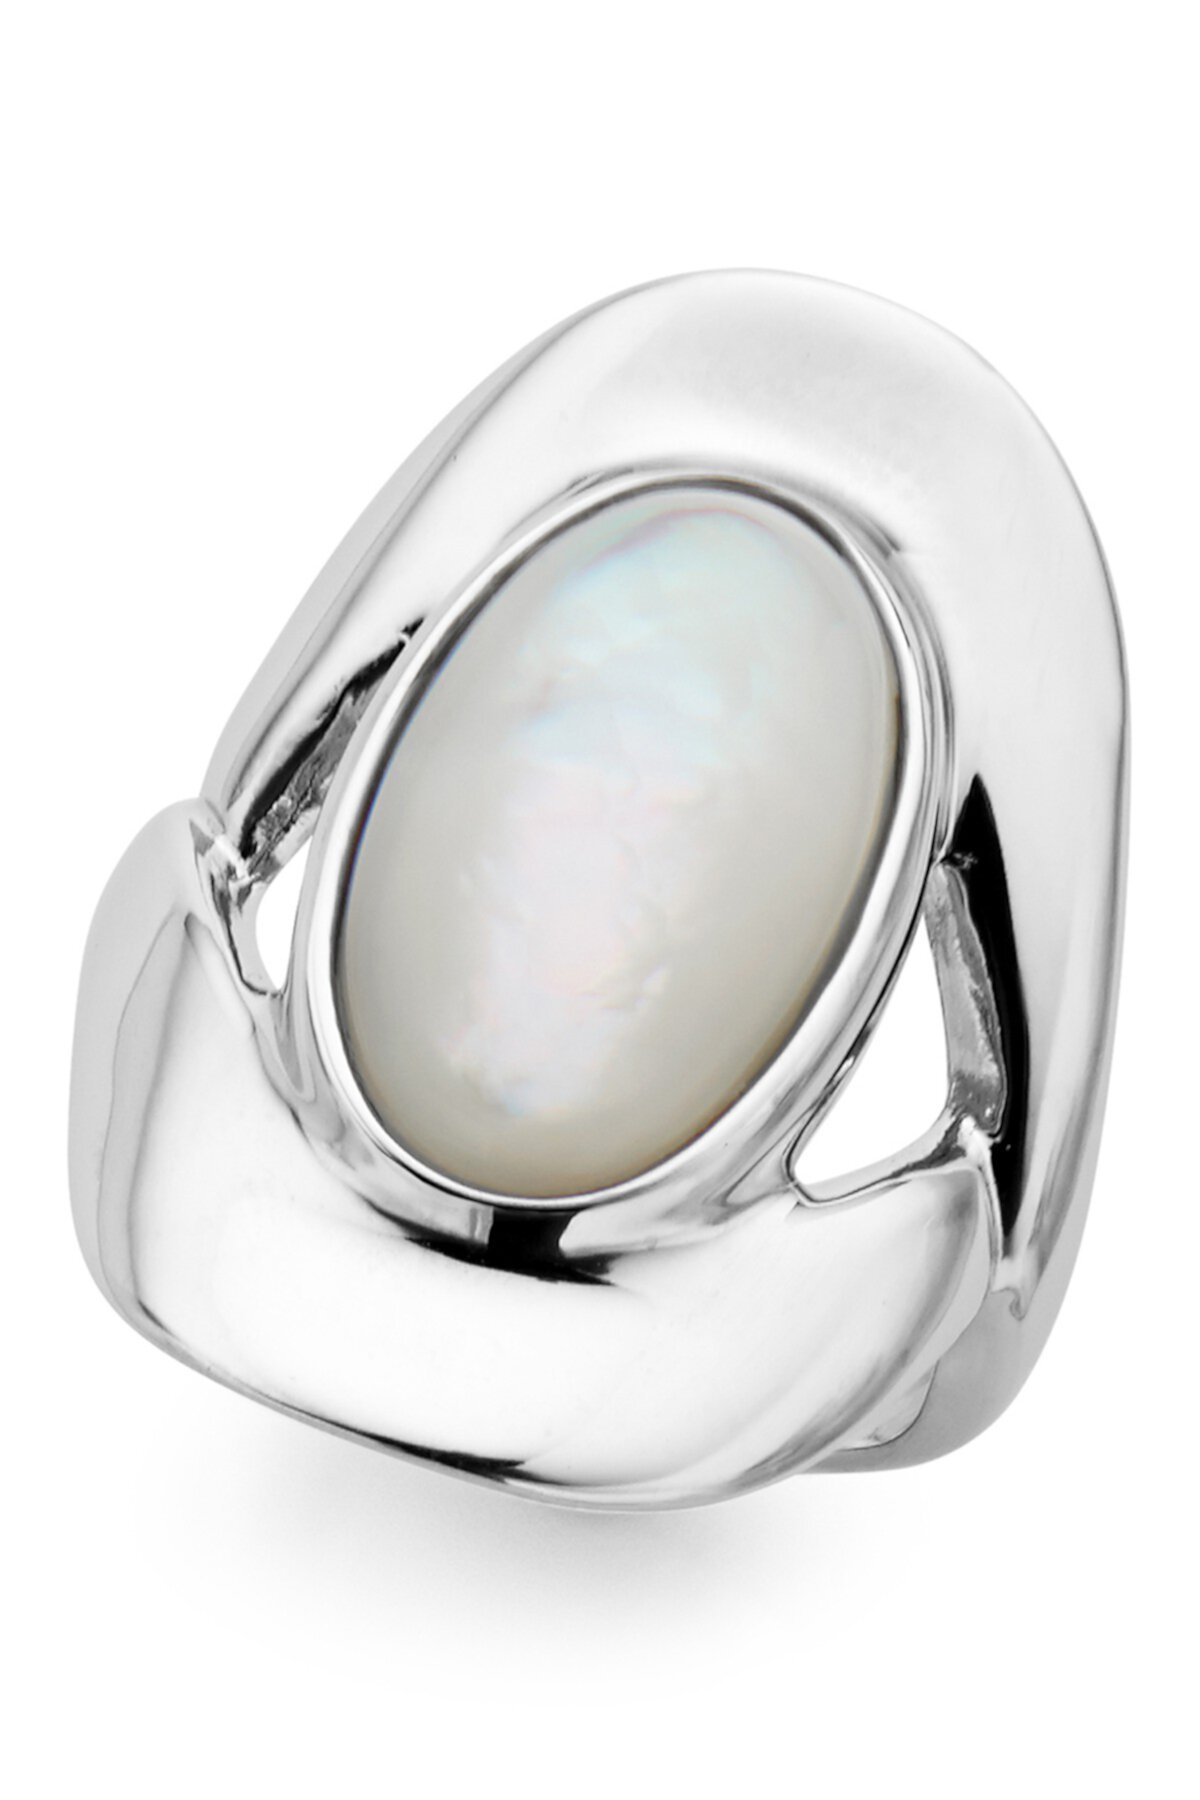 Sterling Silver Bezel Set Mother of Pearl Oval Ring - Size 9 Nambe